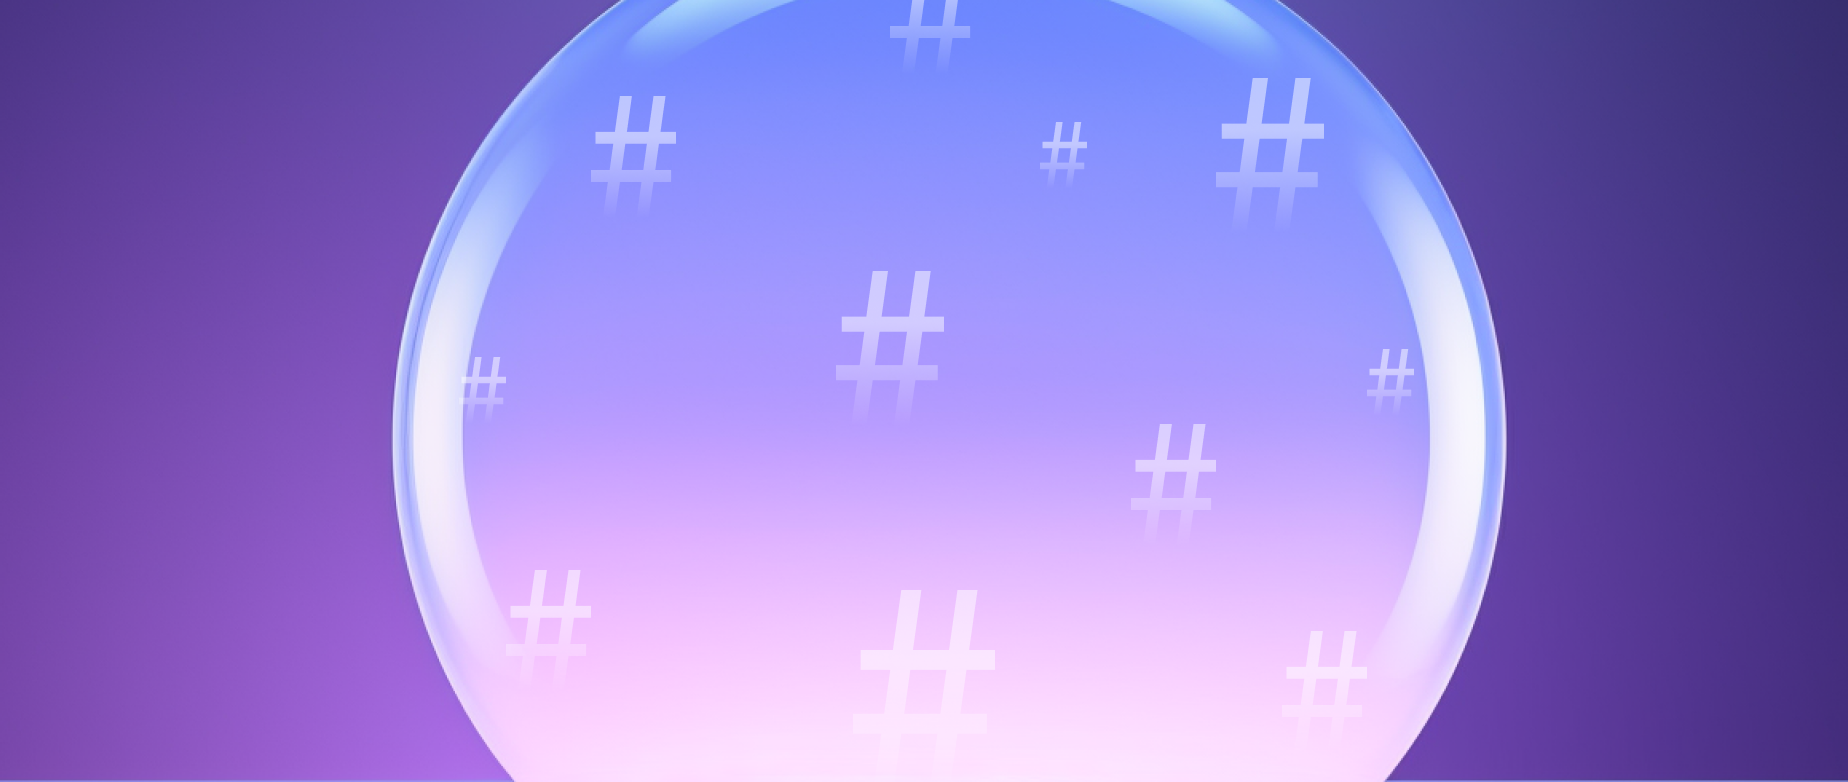 A light blue purple sphere with hashtags on a purple background.